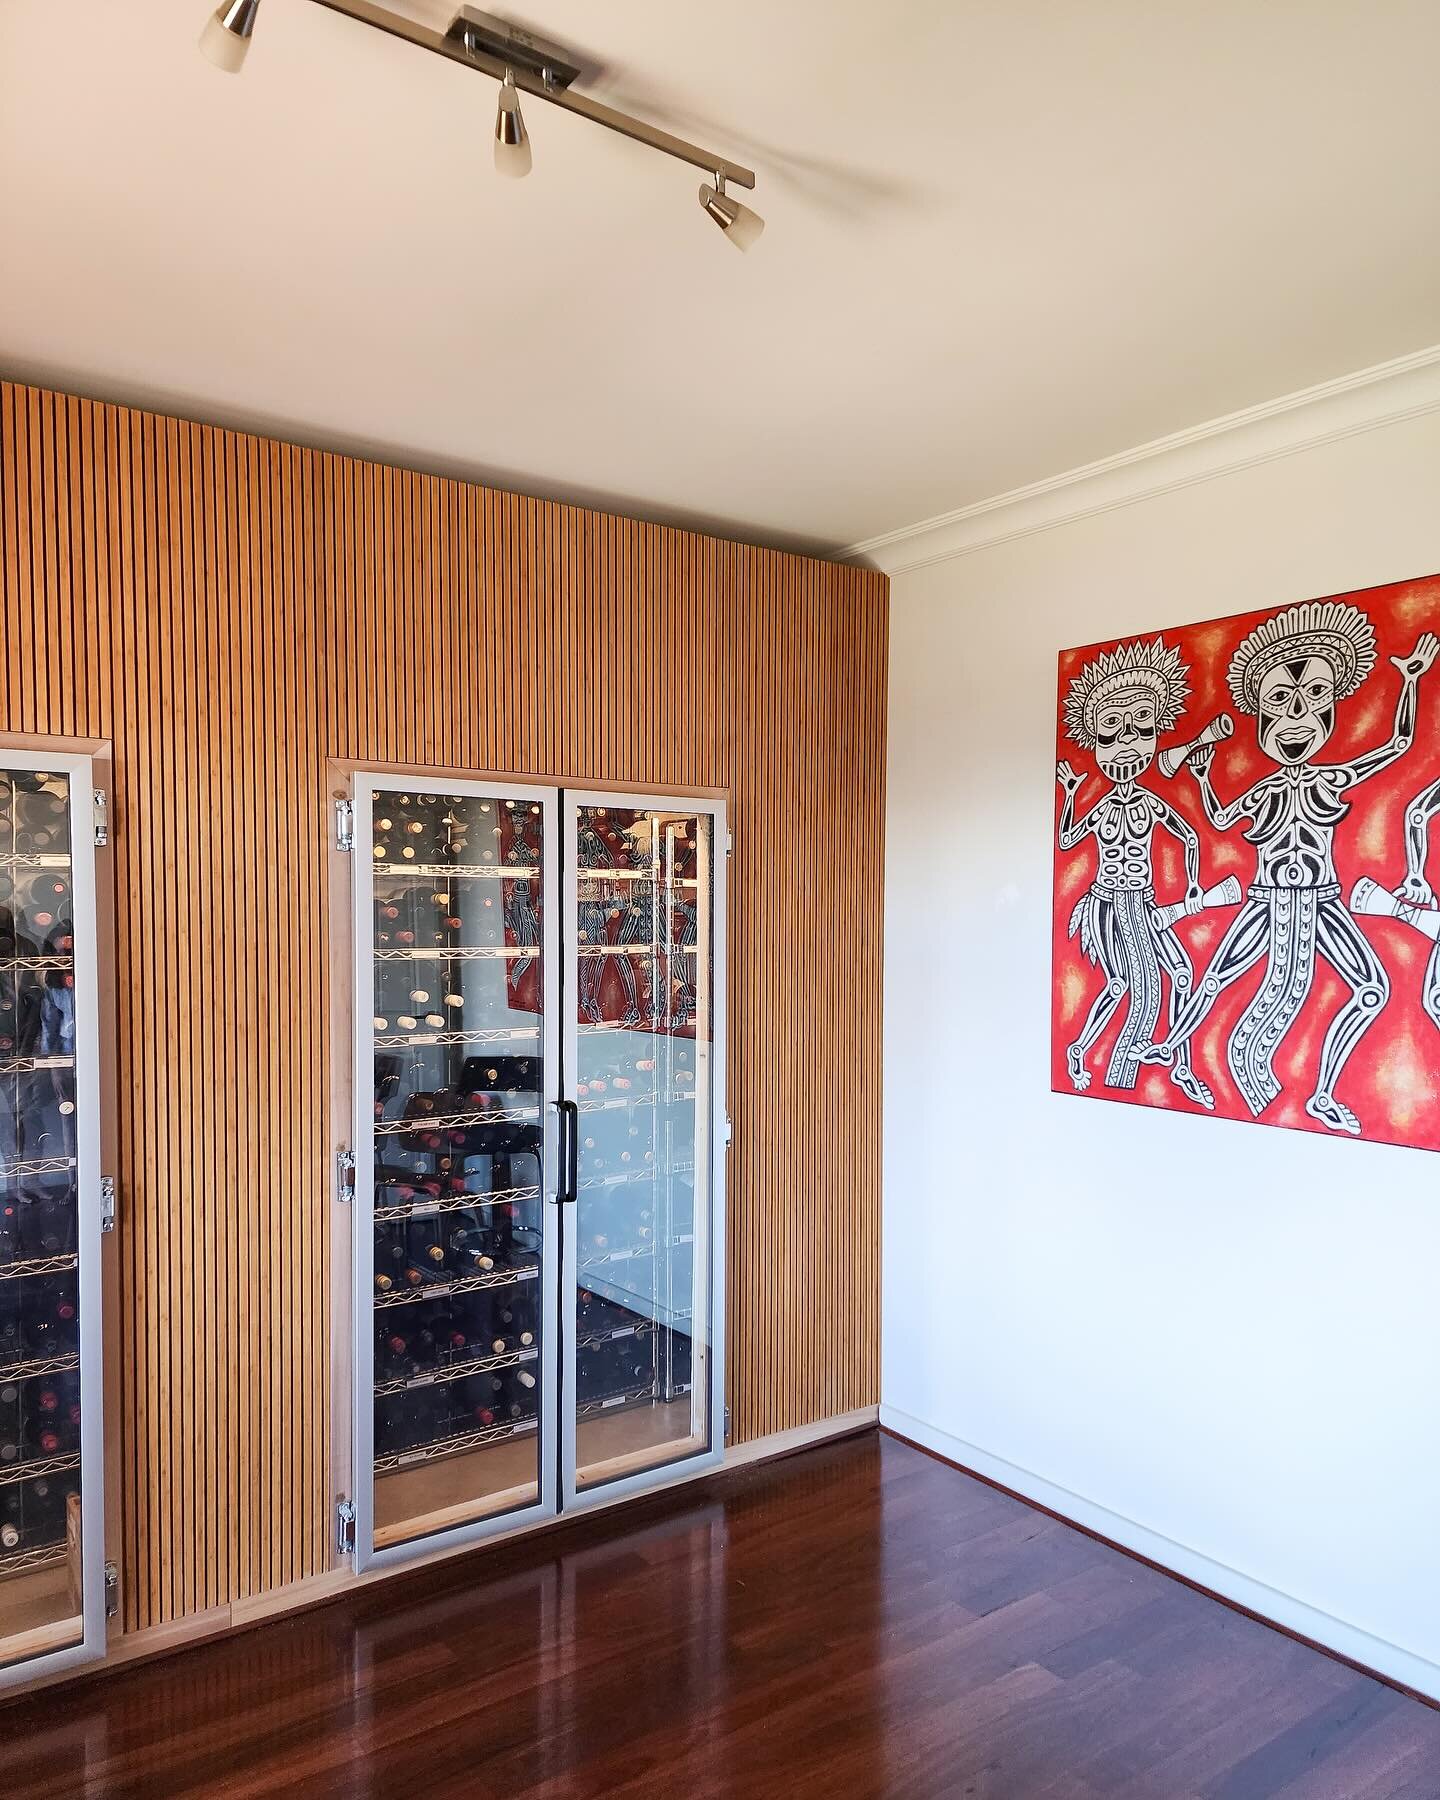 What better way to finish off this incredible wine room, than with our beautiful bamboo panelling!

Profile: Linear6 
Colour: Teak
Installer: @kayudesignco